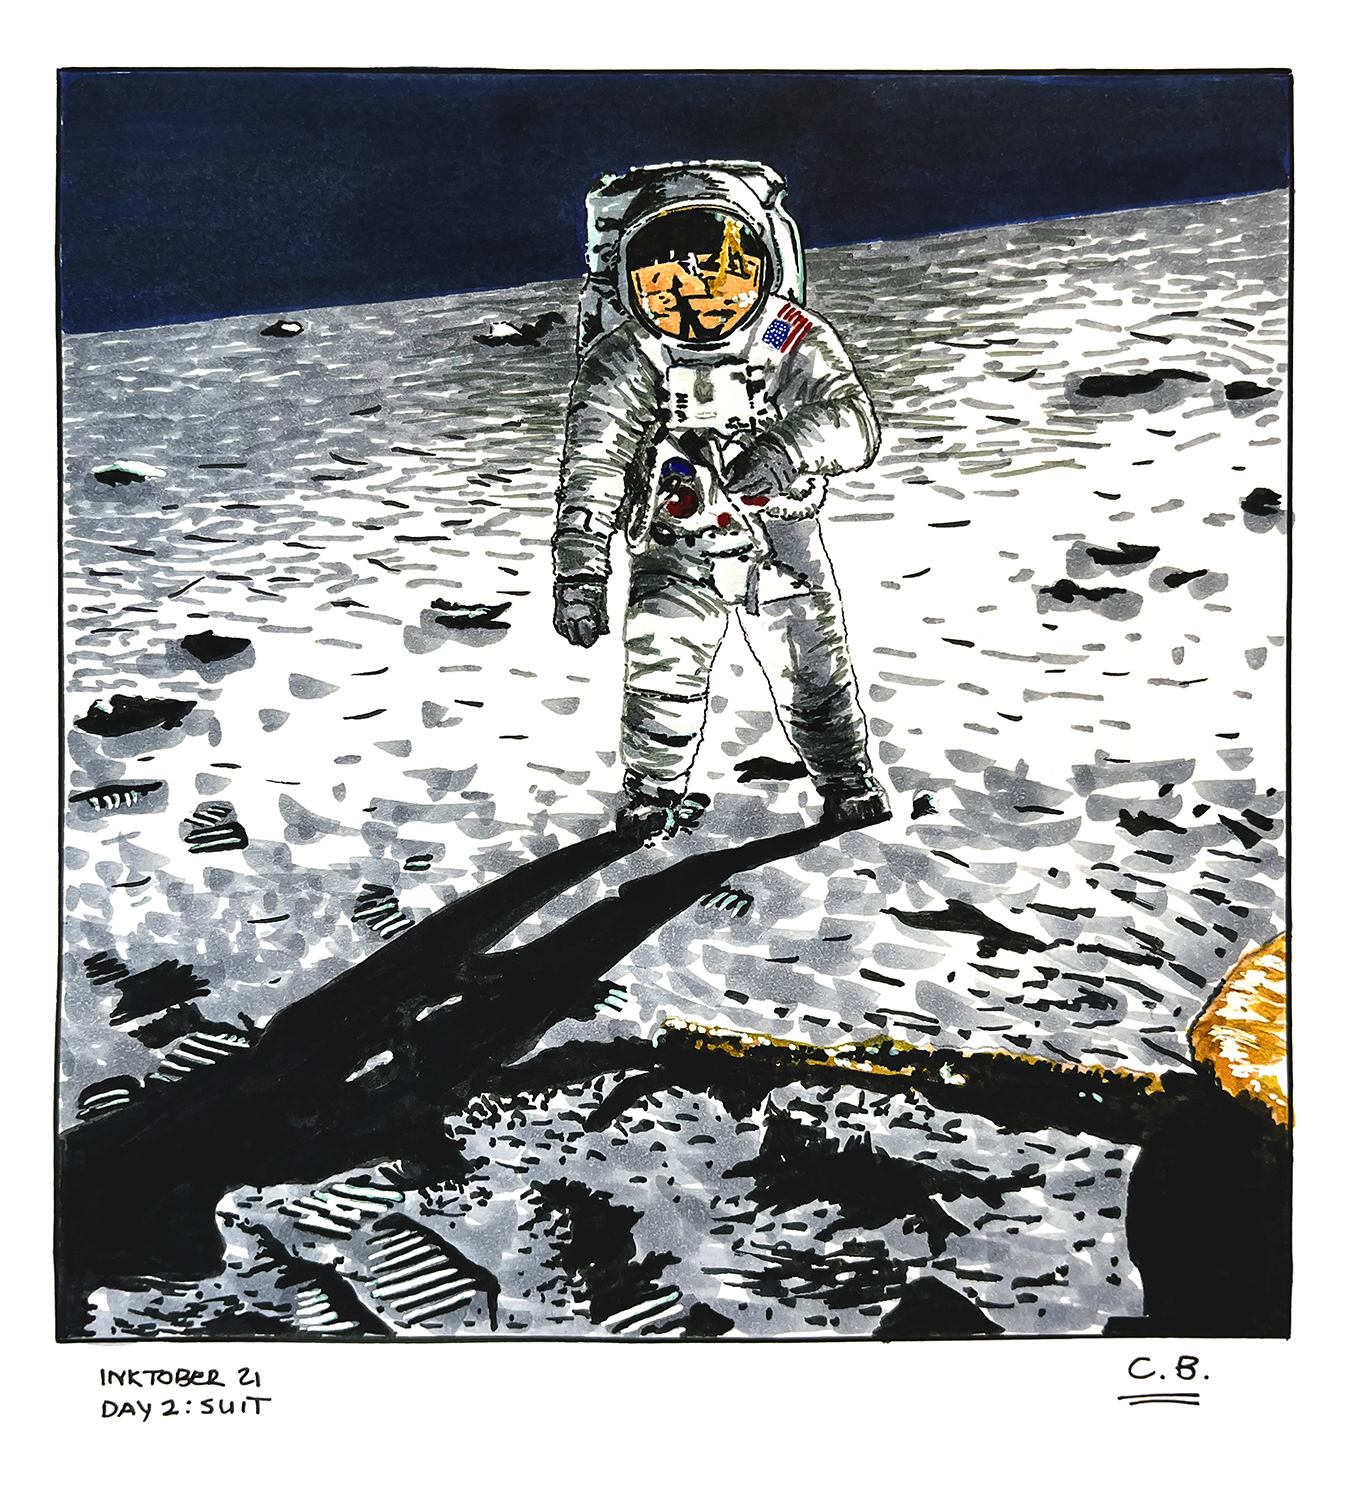 Drawing of Buzz Aldrin on the moon